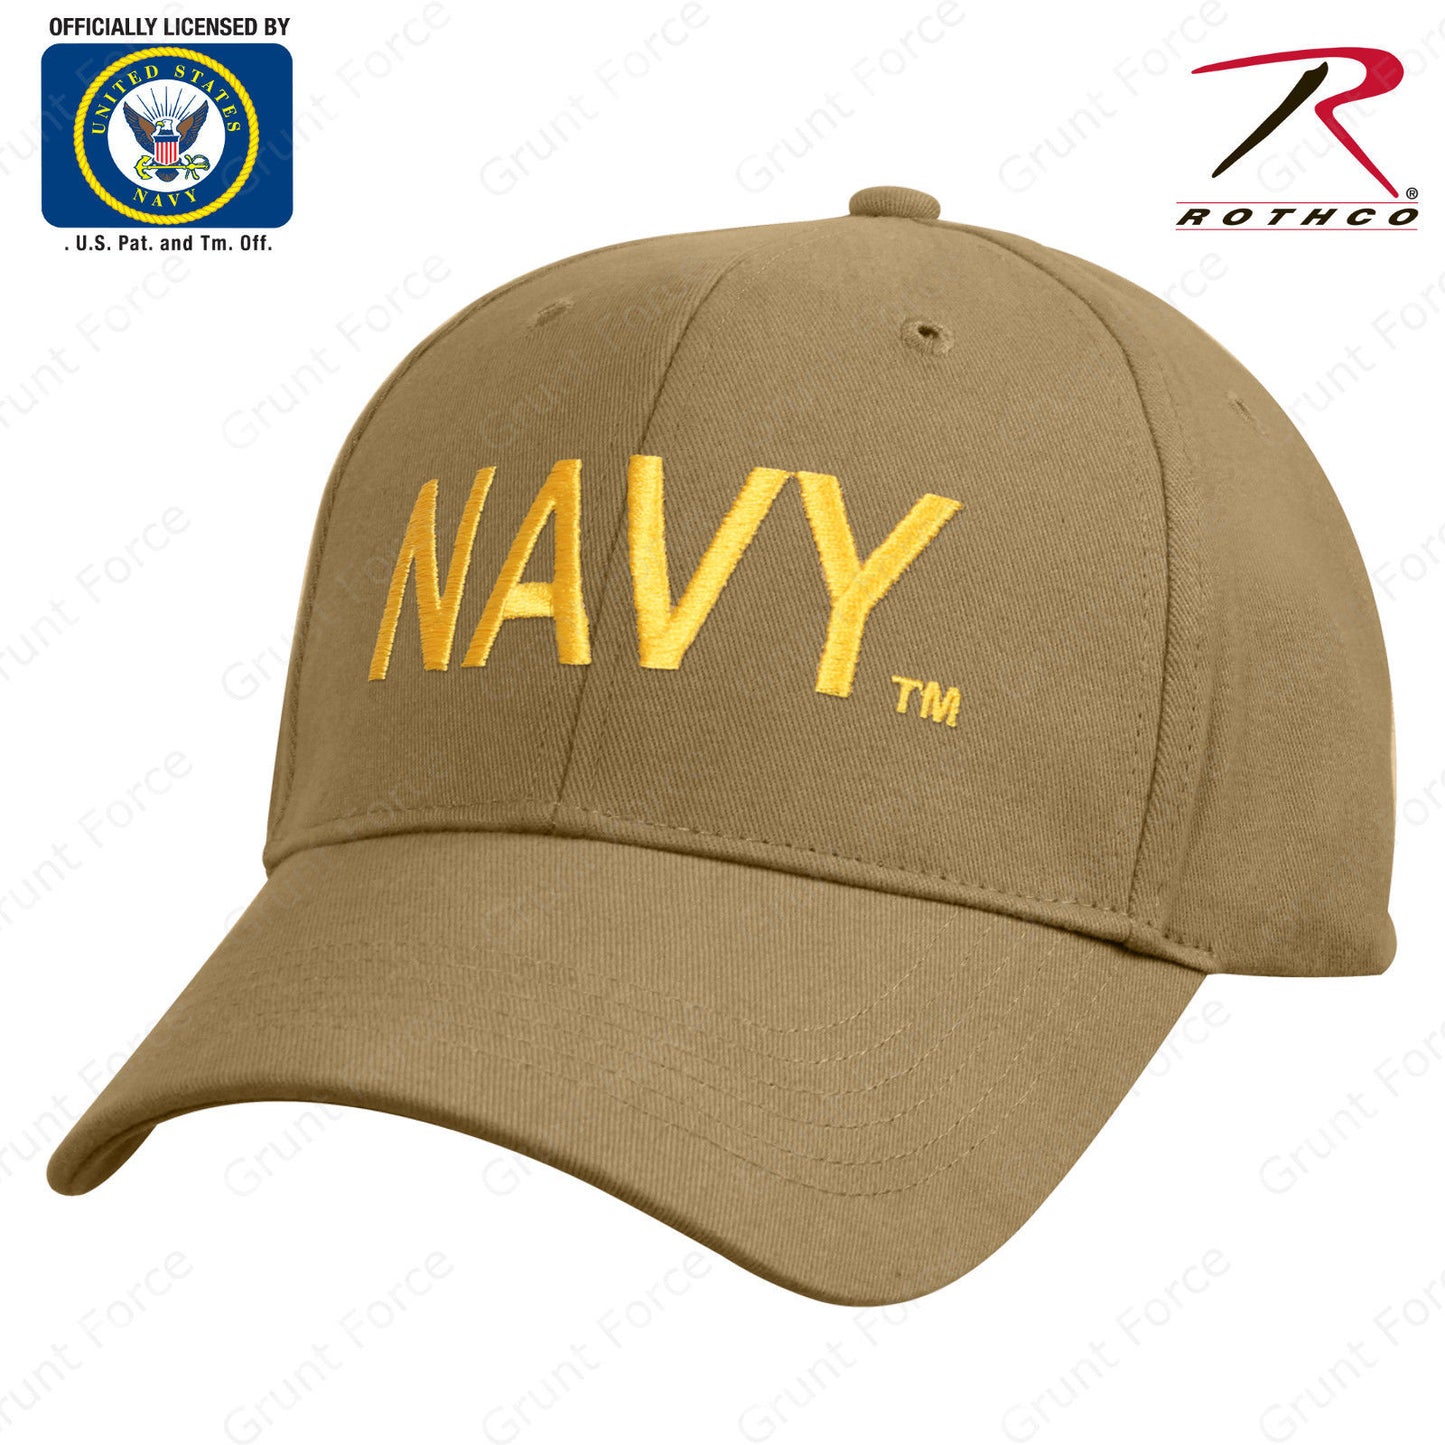 Coyote Brown Mid-Low Pro Baseball Style Hat - Offically Licensed By U.S. NAVY ™